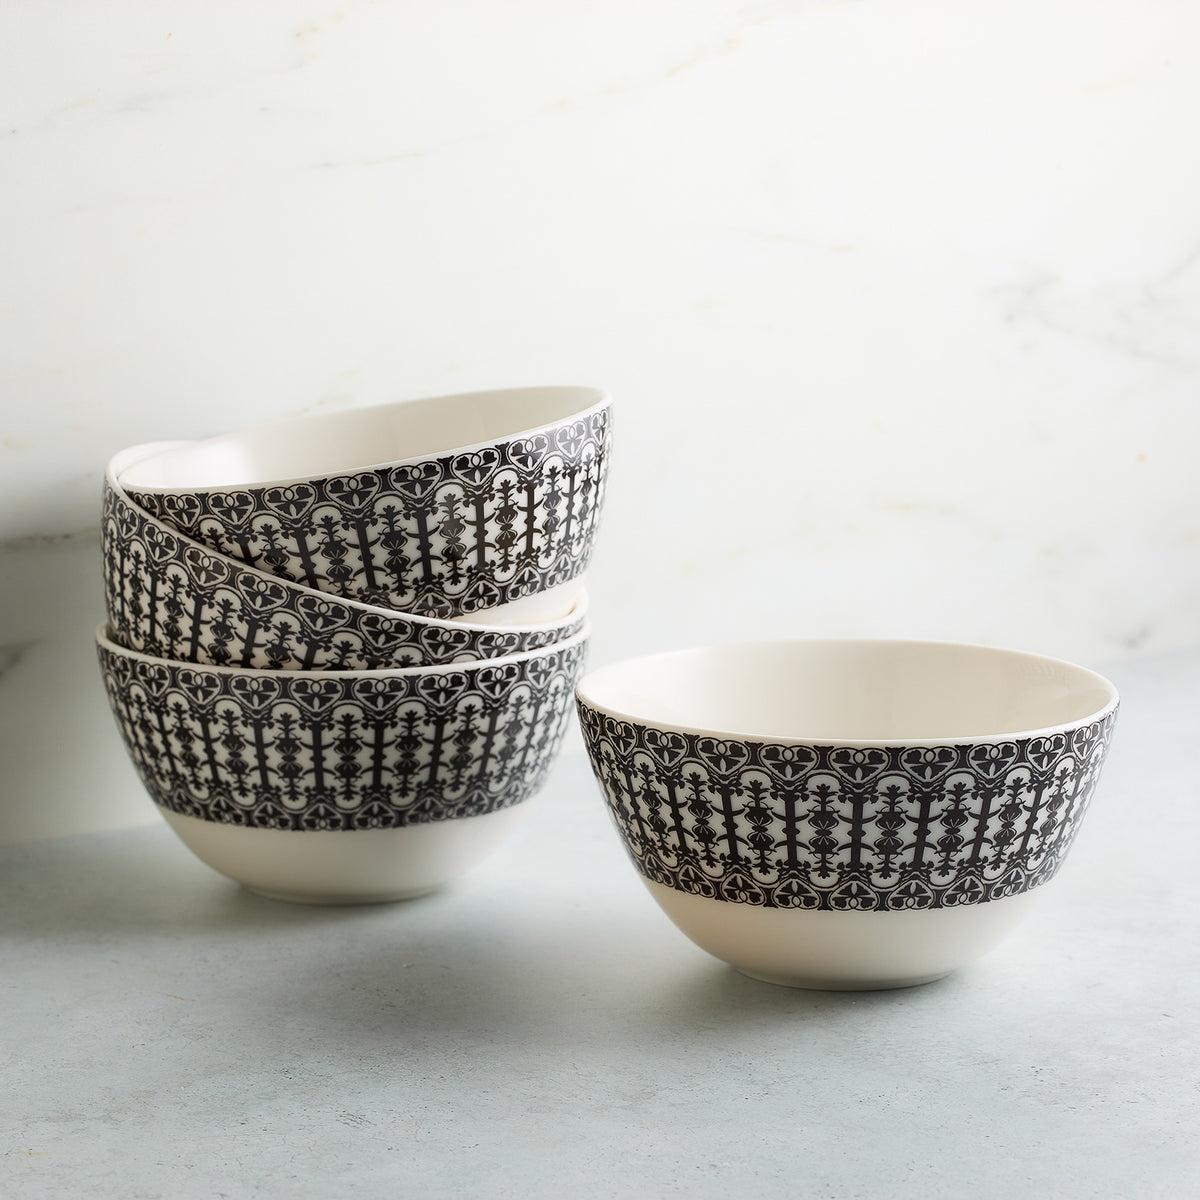 Four Casablanca Cereal Bowls by Caskata Artisanal Home with intricate black and white patterns stacked against a white marble background.